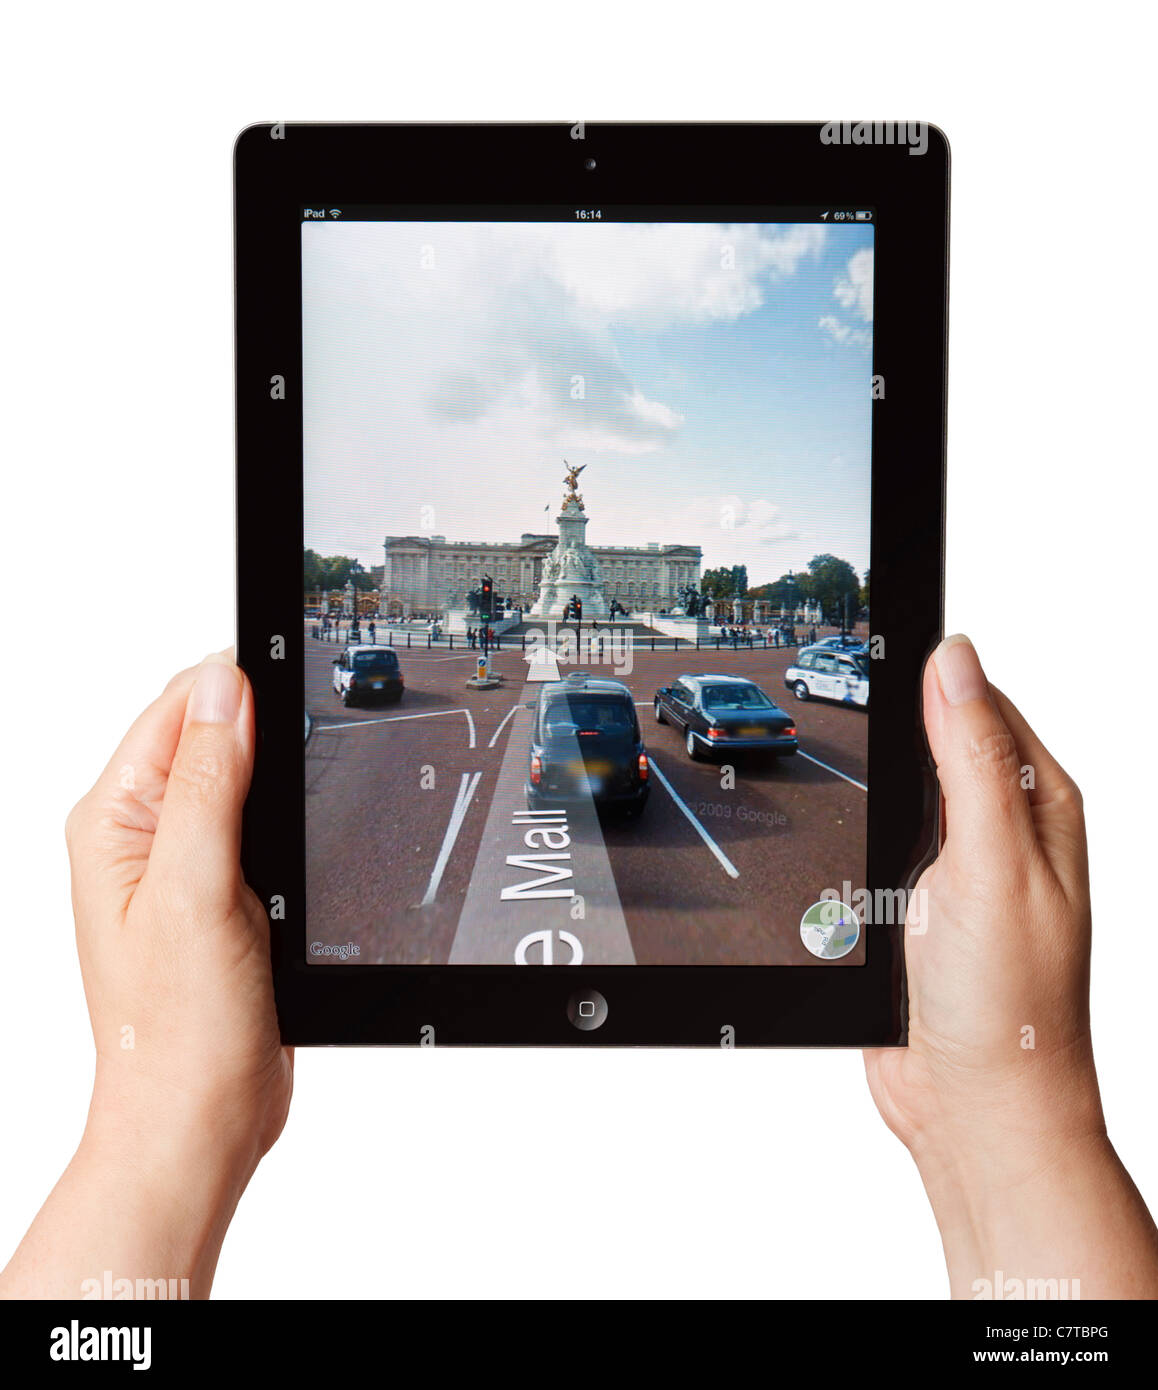 Hands holding an iPad showing Google Street view Stock Photo